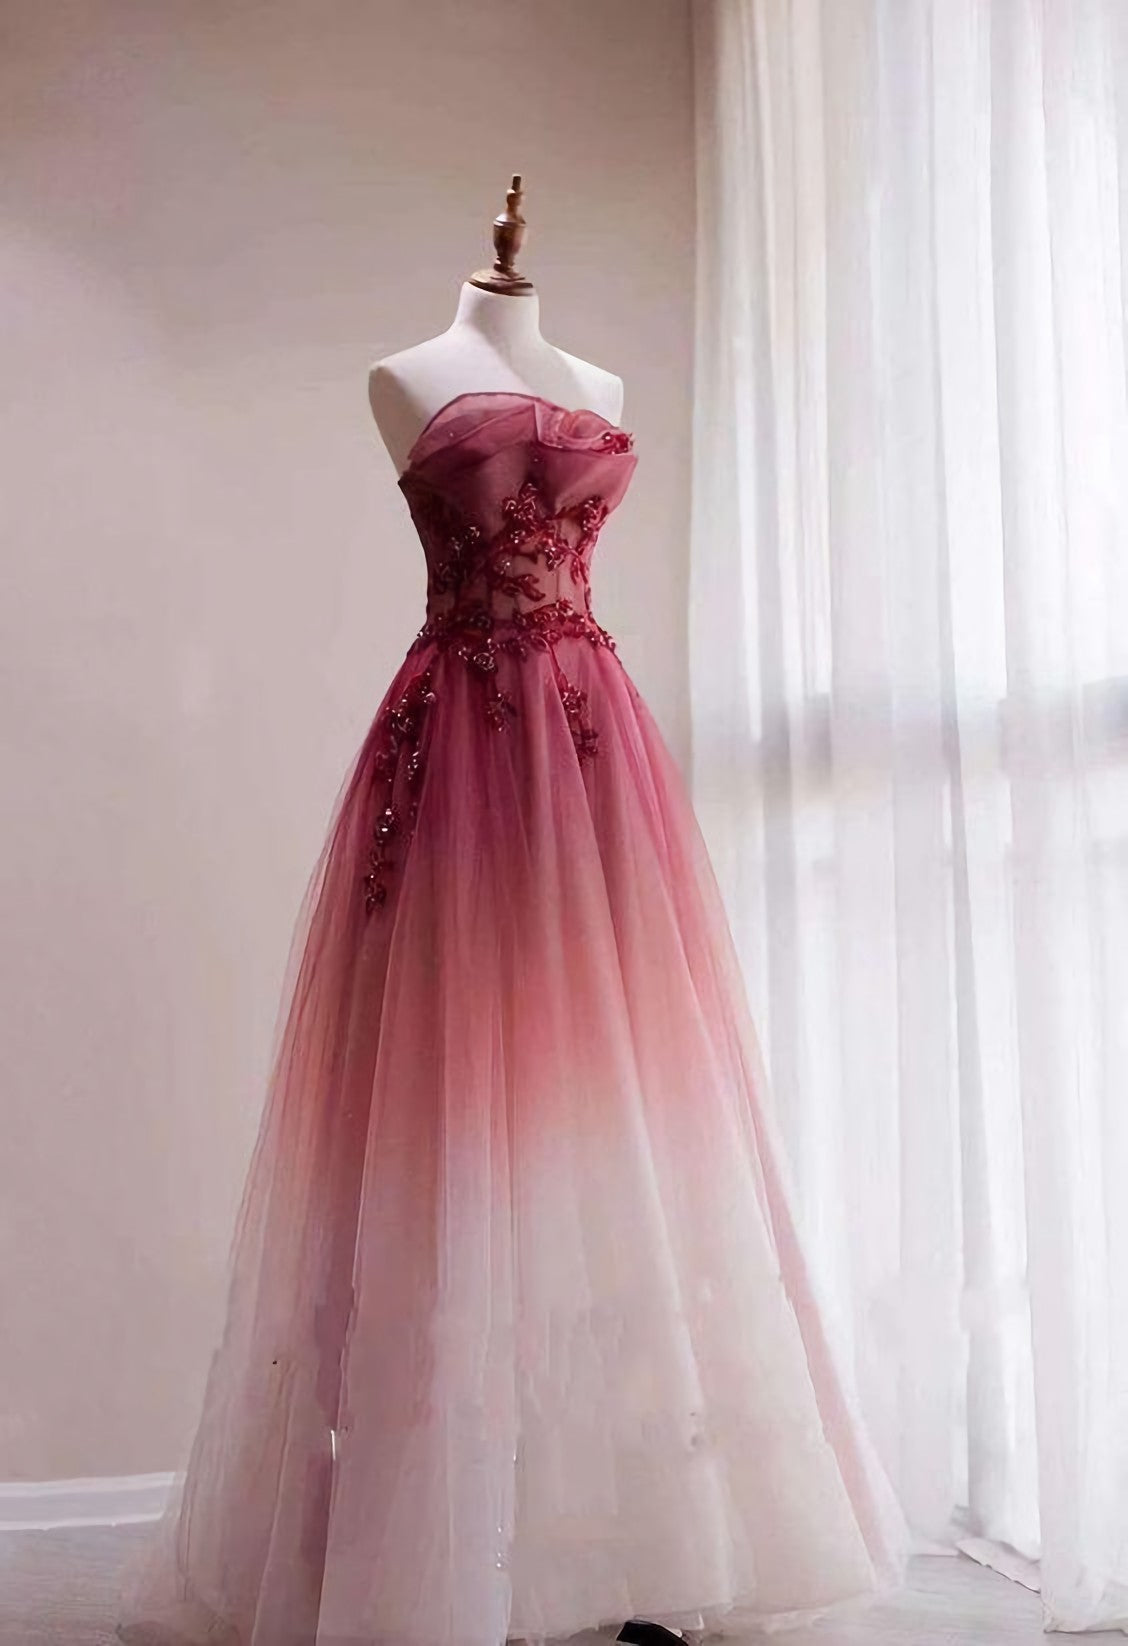 Wedding Dresses With Shoes, Red Gradient Prom Dress, Vintage Wedding Dress, Red Strapless Party Dress, With Beaded Bridal Dress